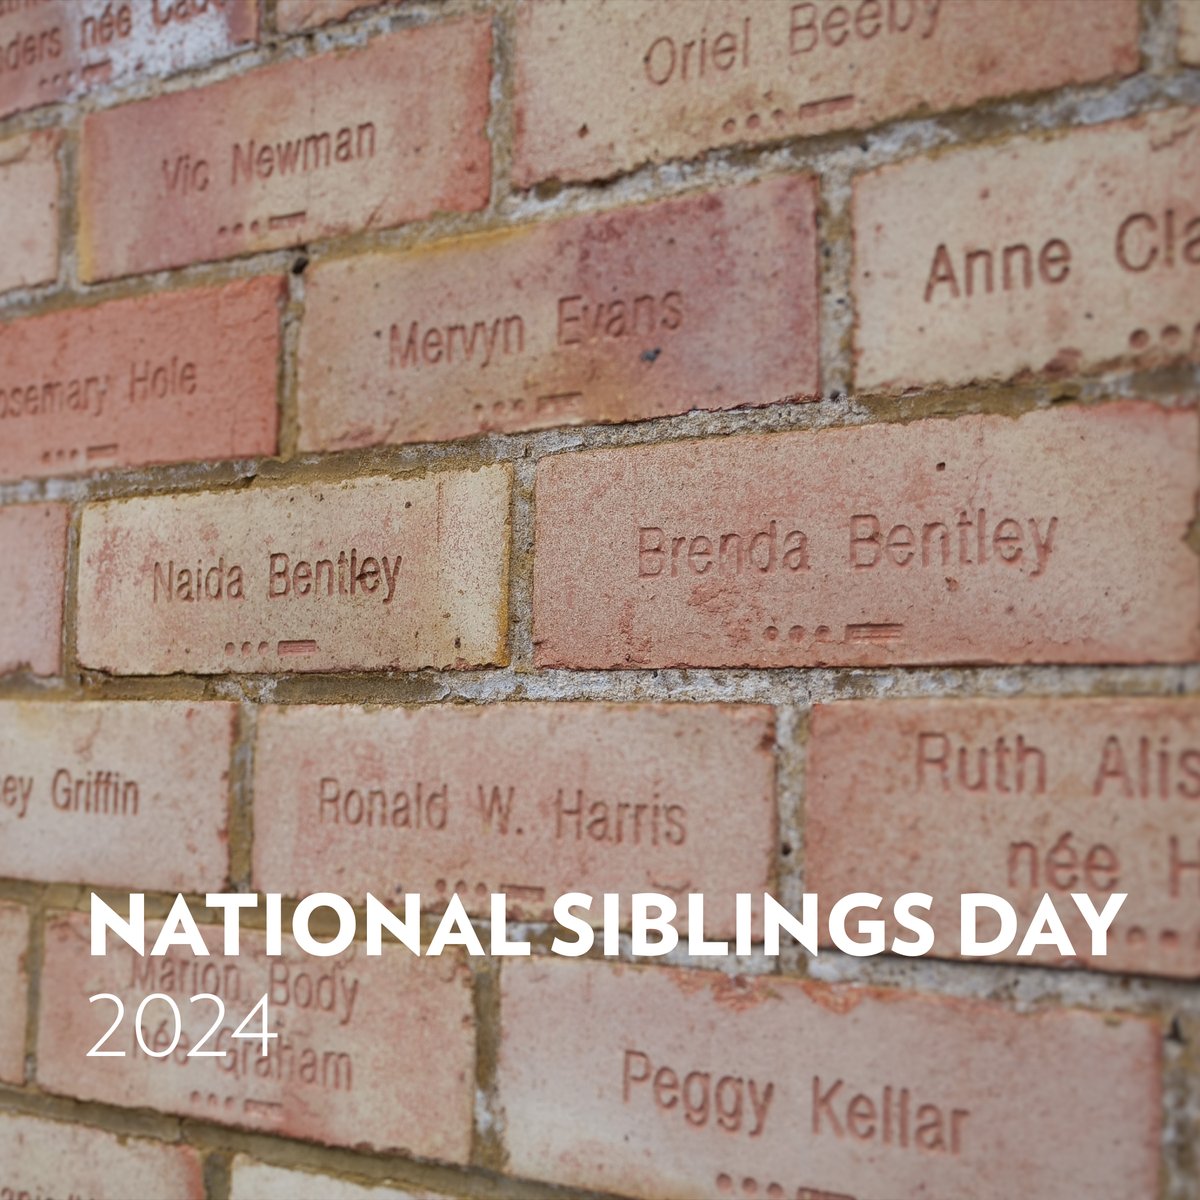 Today is #NationalSiblingsDay! Twins Naida & Brenda Bentley remember their time together as Wrens by sponsoring two bricks on The Codebreakers' Wall. Their messages read ‘remembering happy days with my twin as WRENS 88563 and 88581 in Woburn Abbey, Colombo and Kandy’.